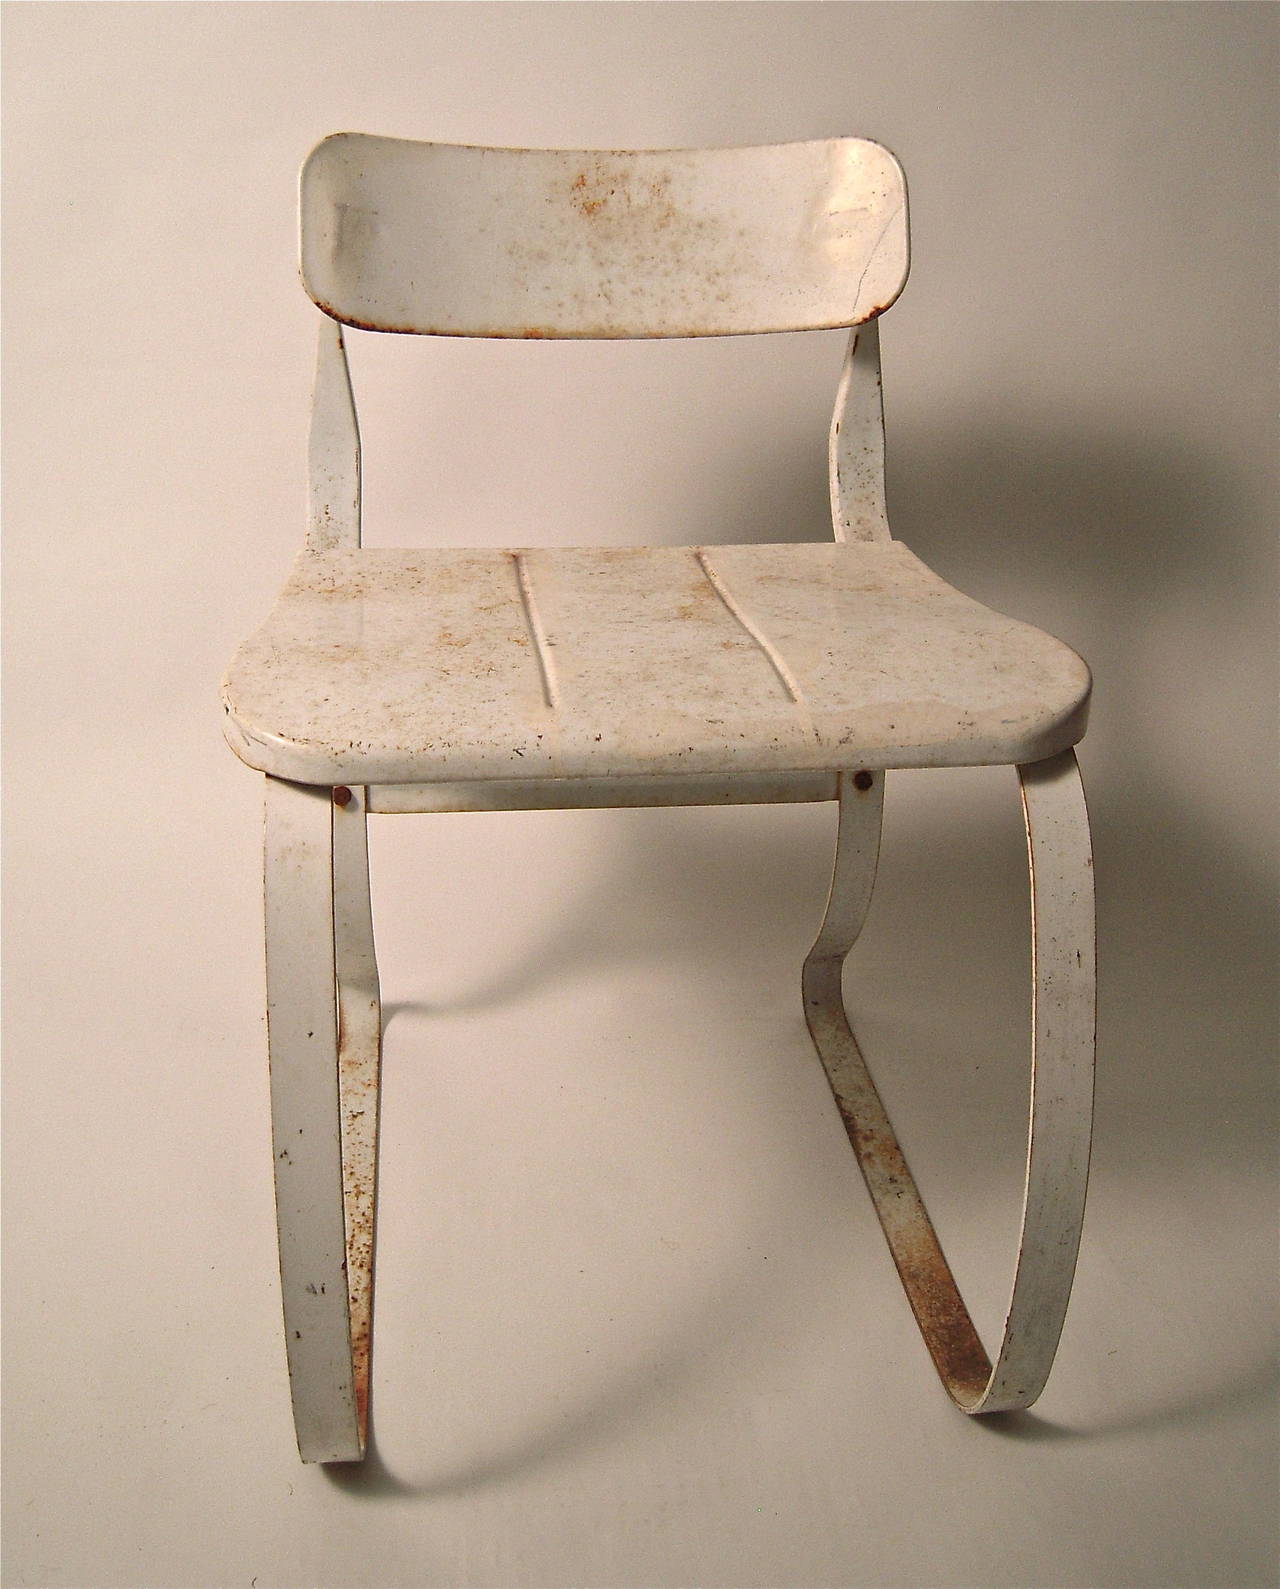 A  sculptural vintage Ironrite Health Chair designed by Herman Sperlich, circa 1938-1940, in white painted metal with spring form design and adjustable back which responds to the movements of the sitter. Made by the Ironrite Company, Detroit,